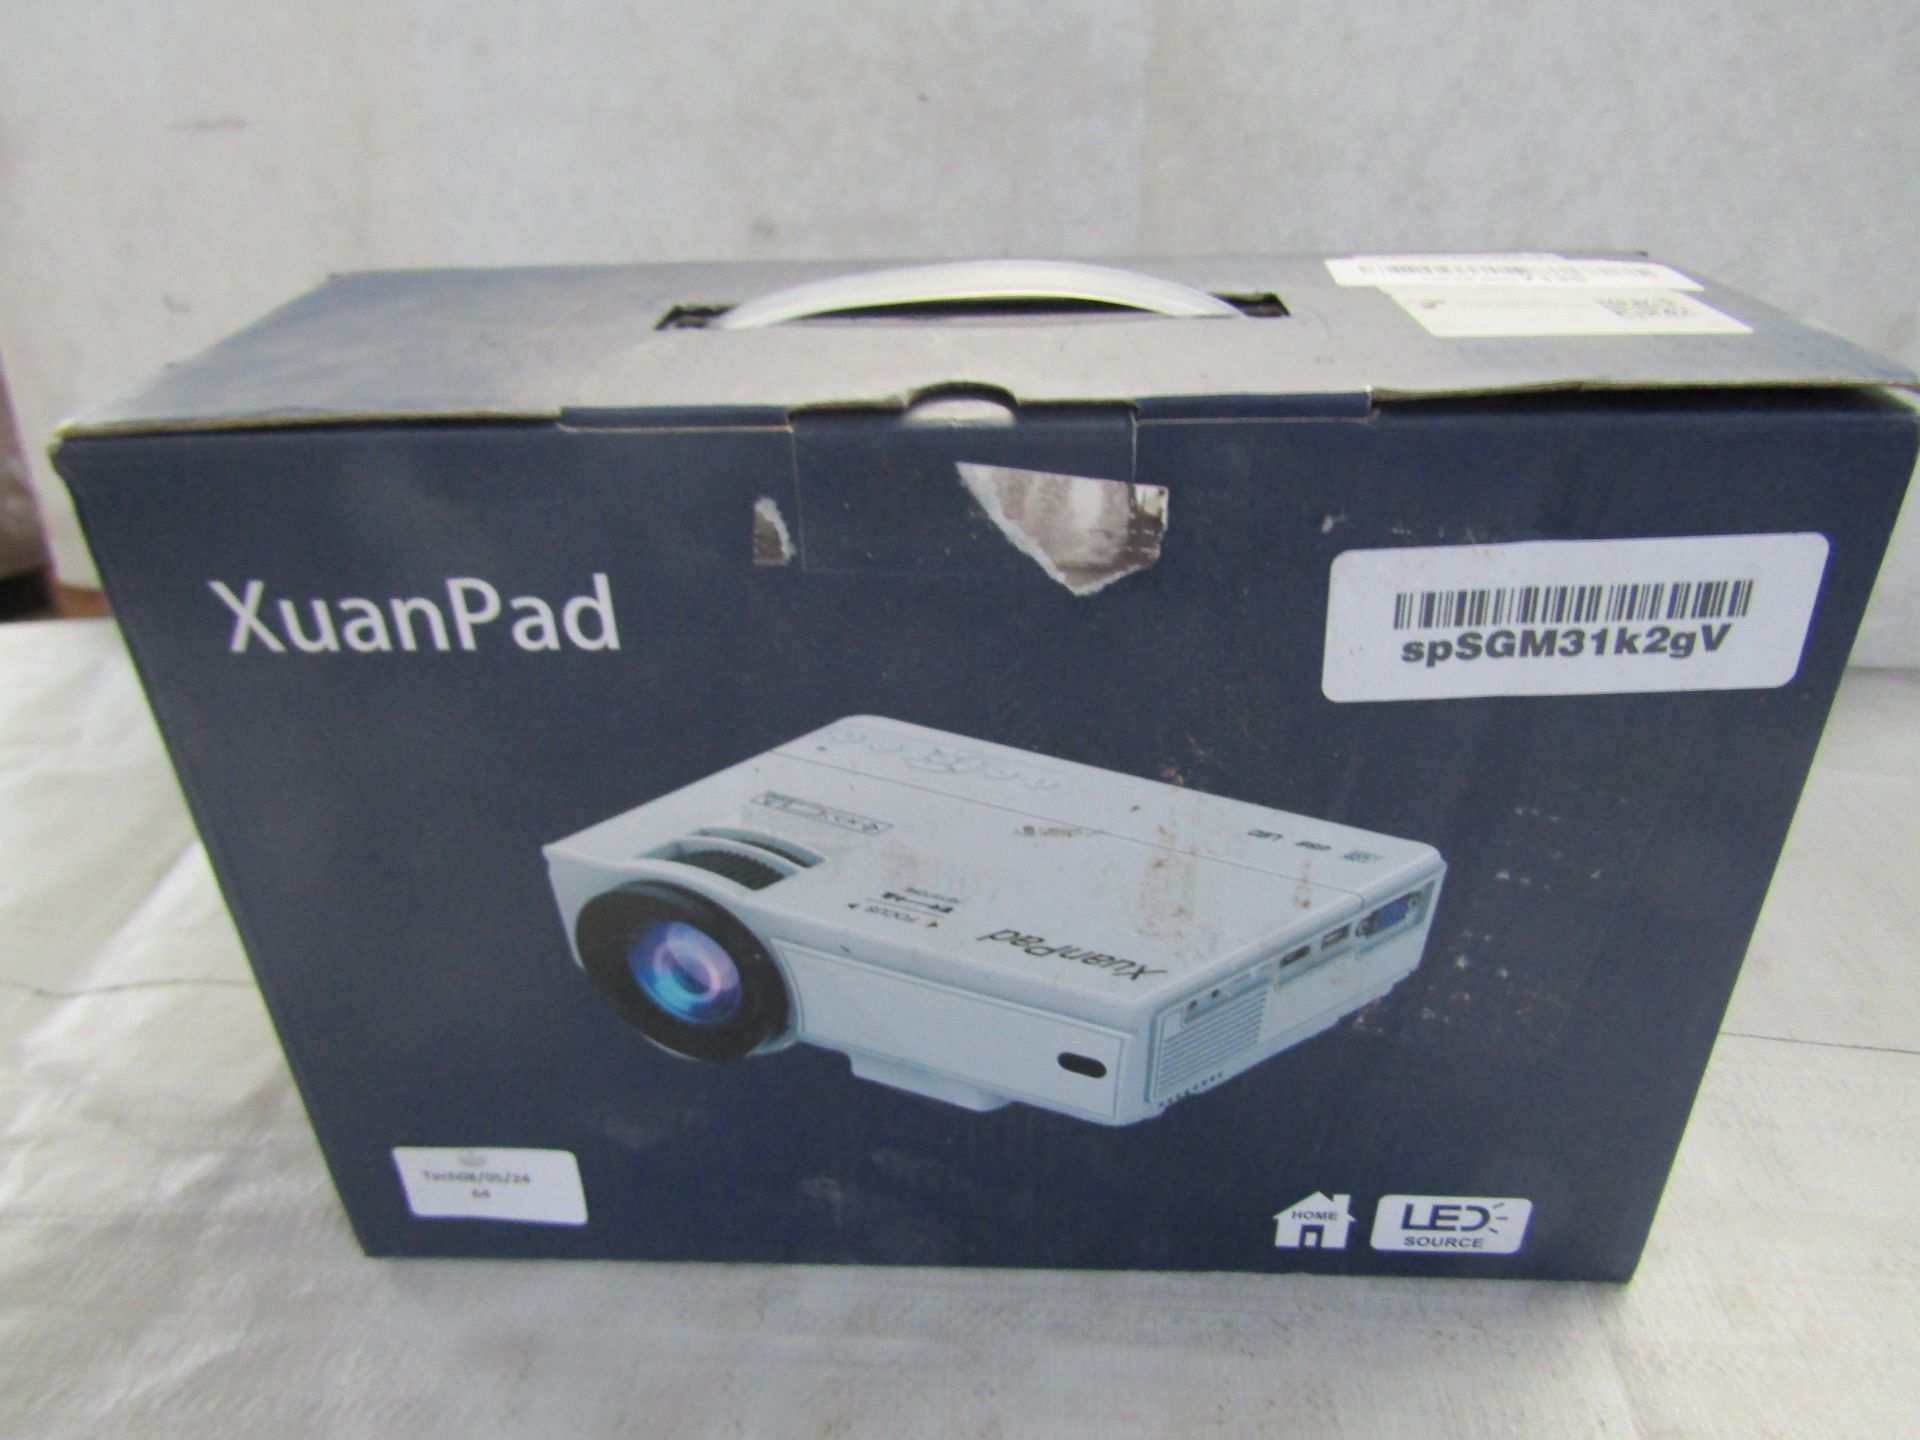 Xuanpad Video Projector, Unchecked & Boxed. RRP £59